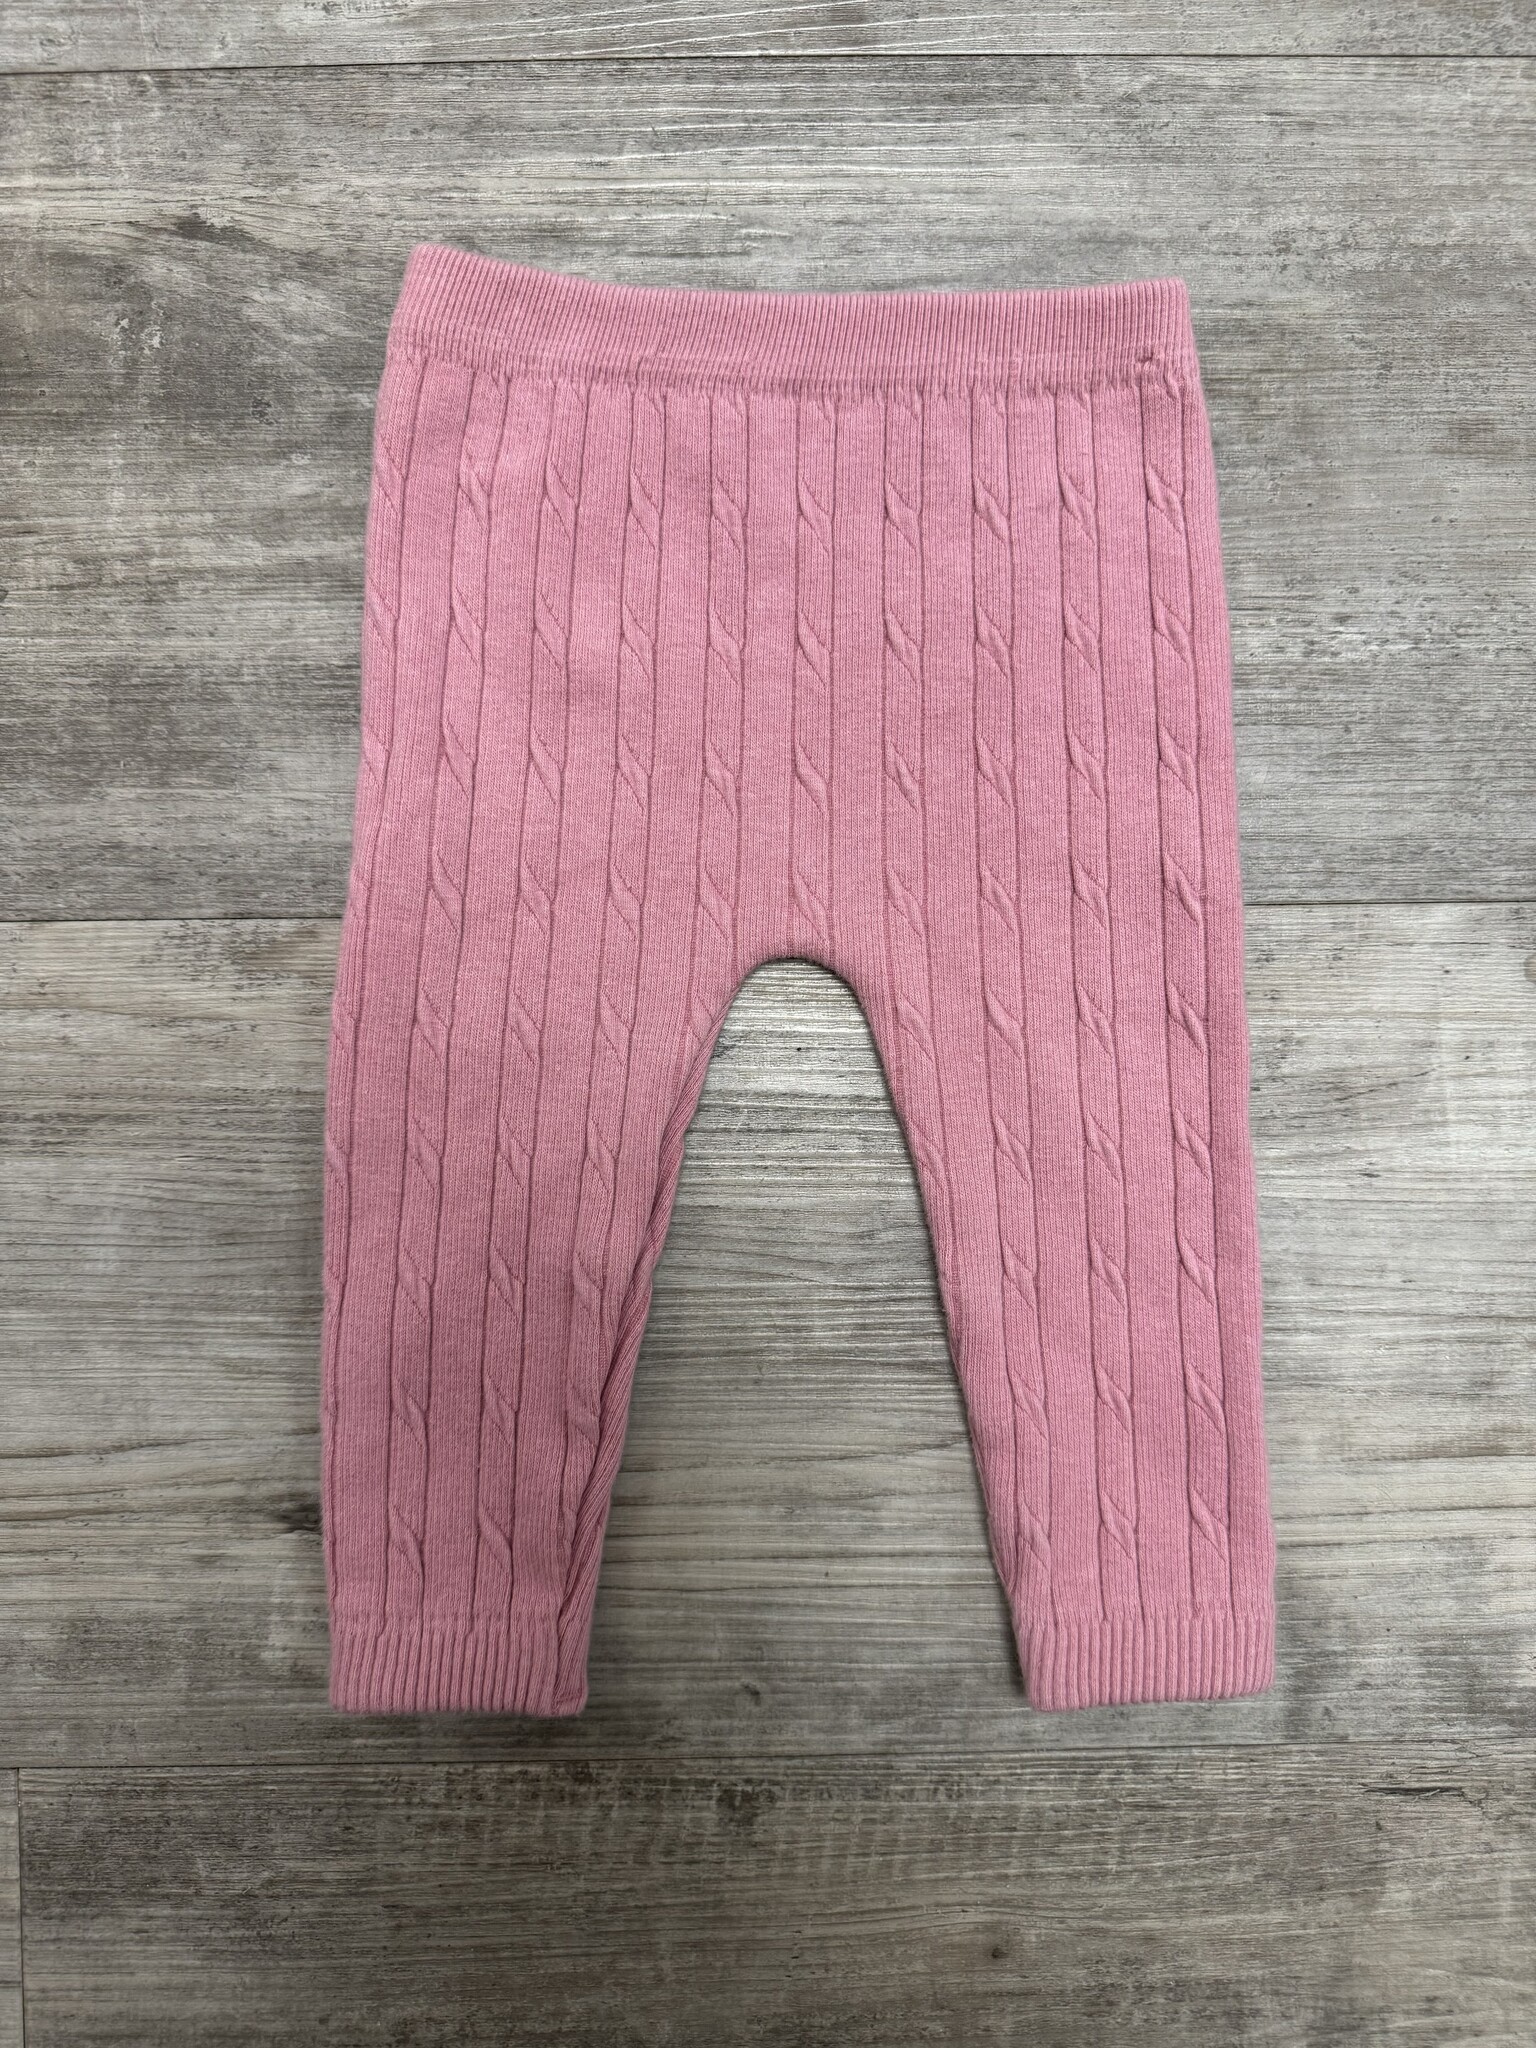 Cable Knit Footless Tights - Size 3-6M